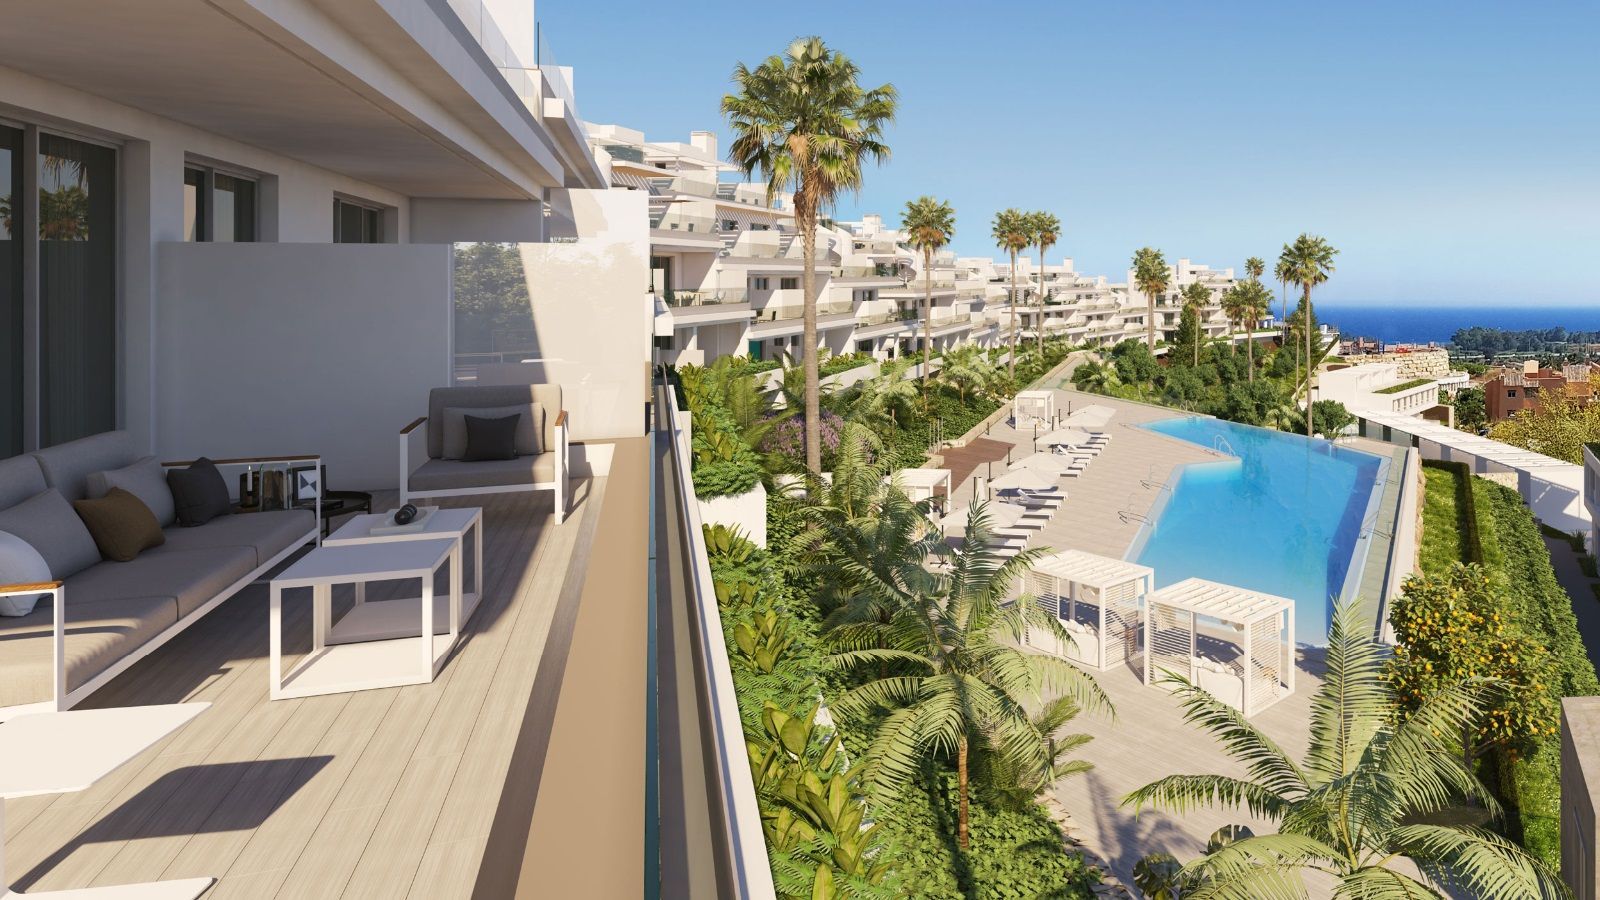 Townhouses with sea views in Cancelada, Estepona